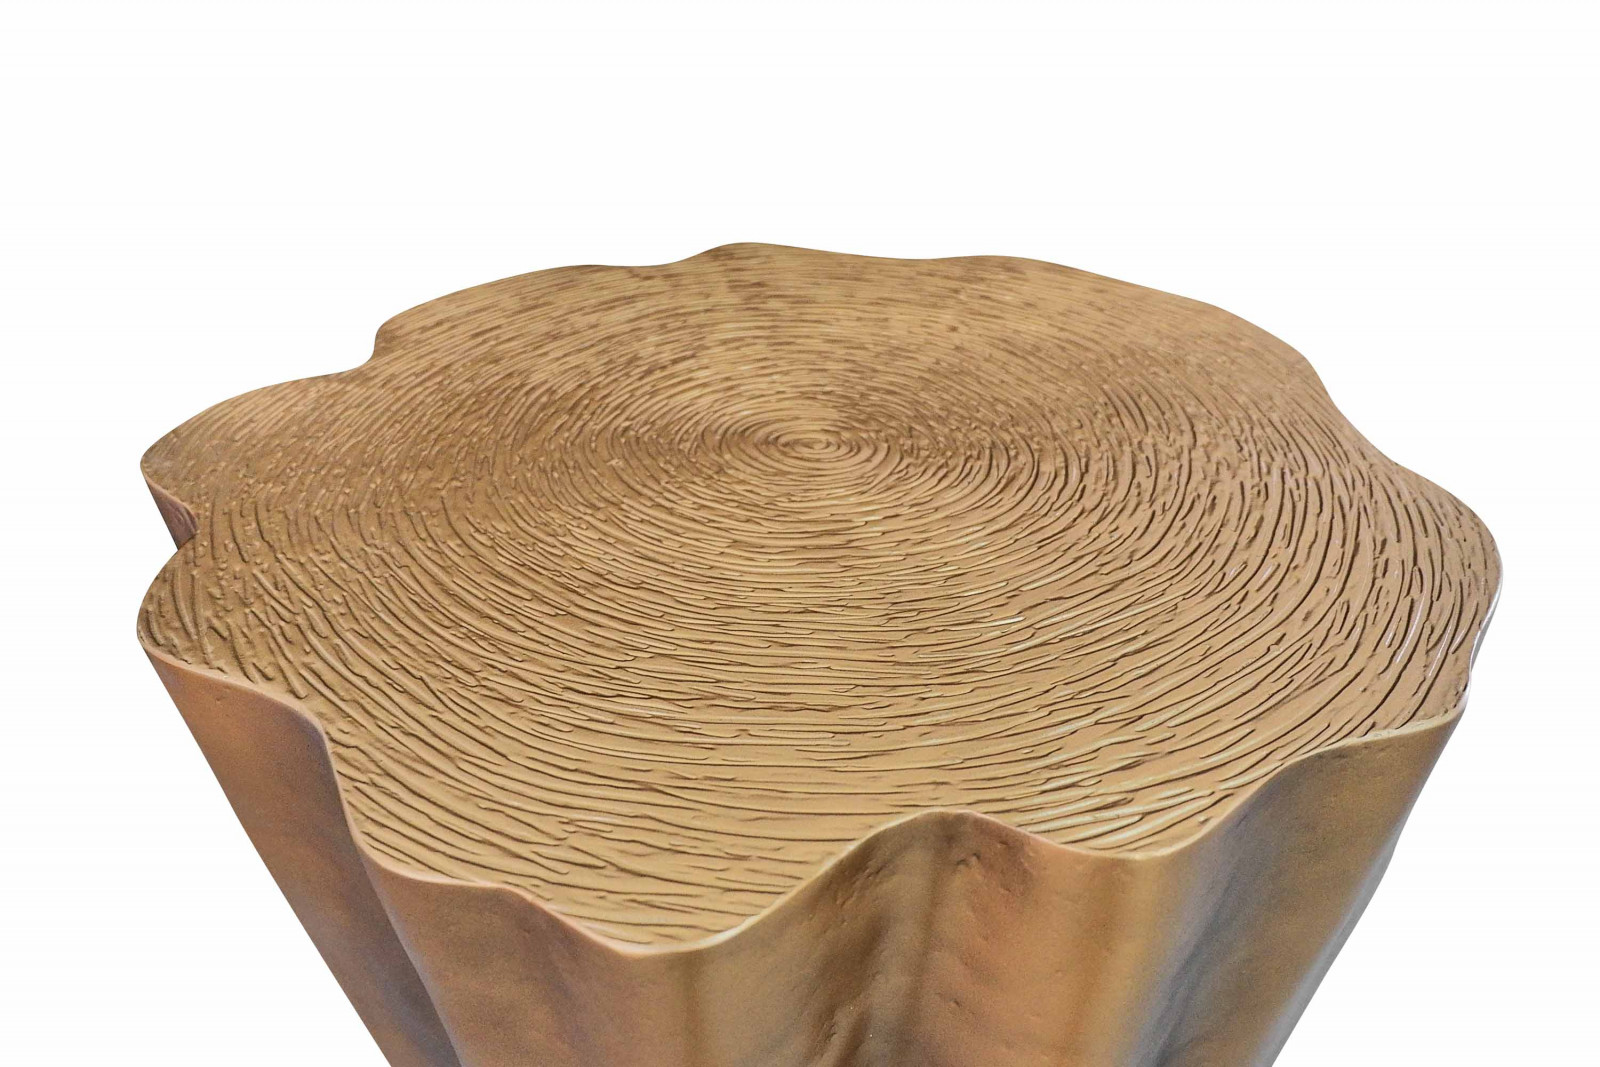 bar_side_table_exclusive_luxurious_sculptural_tree_trunk_gold_textured_gaia_karpa_26-1573-1600-1400-100